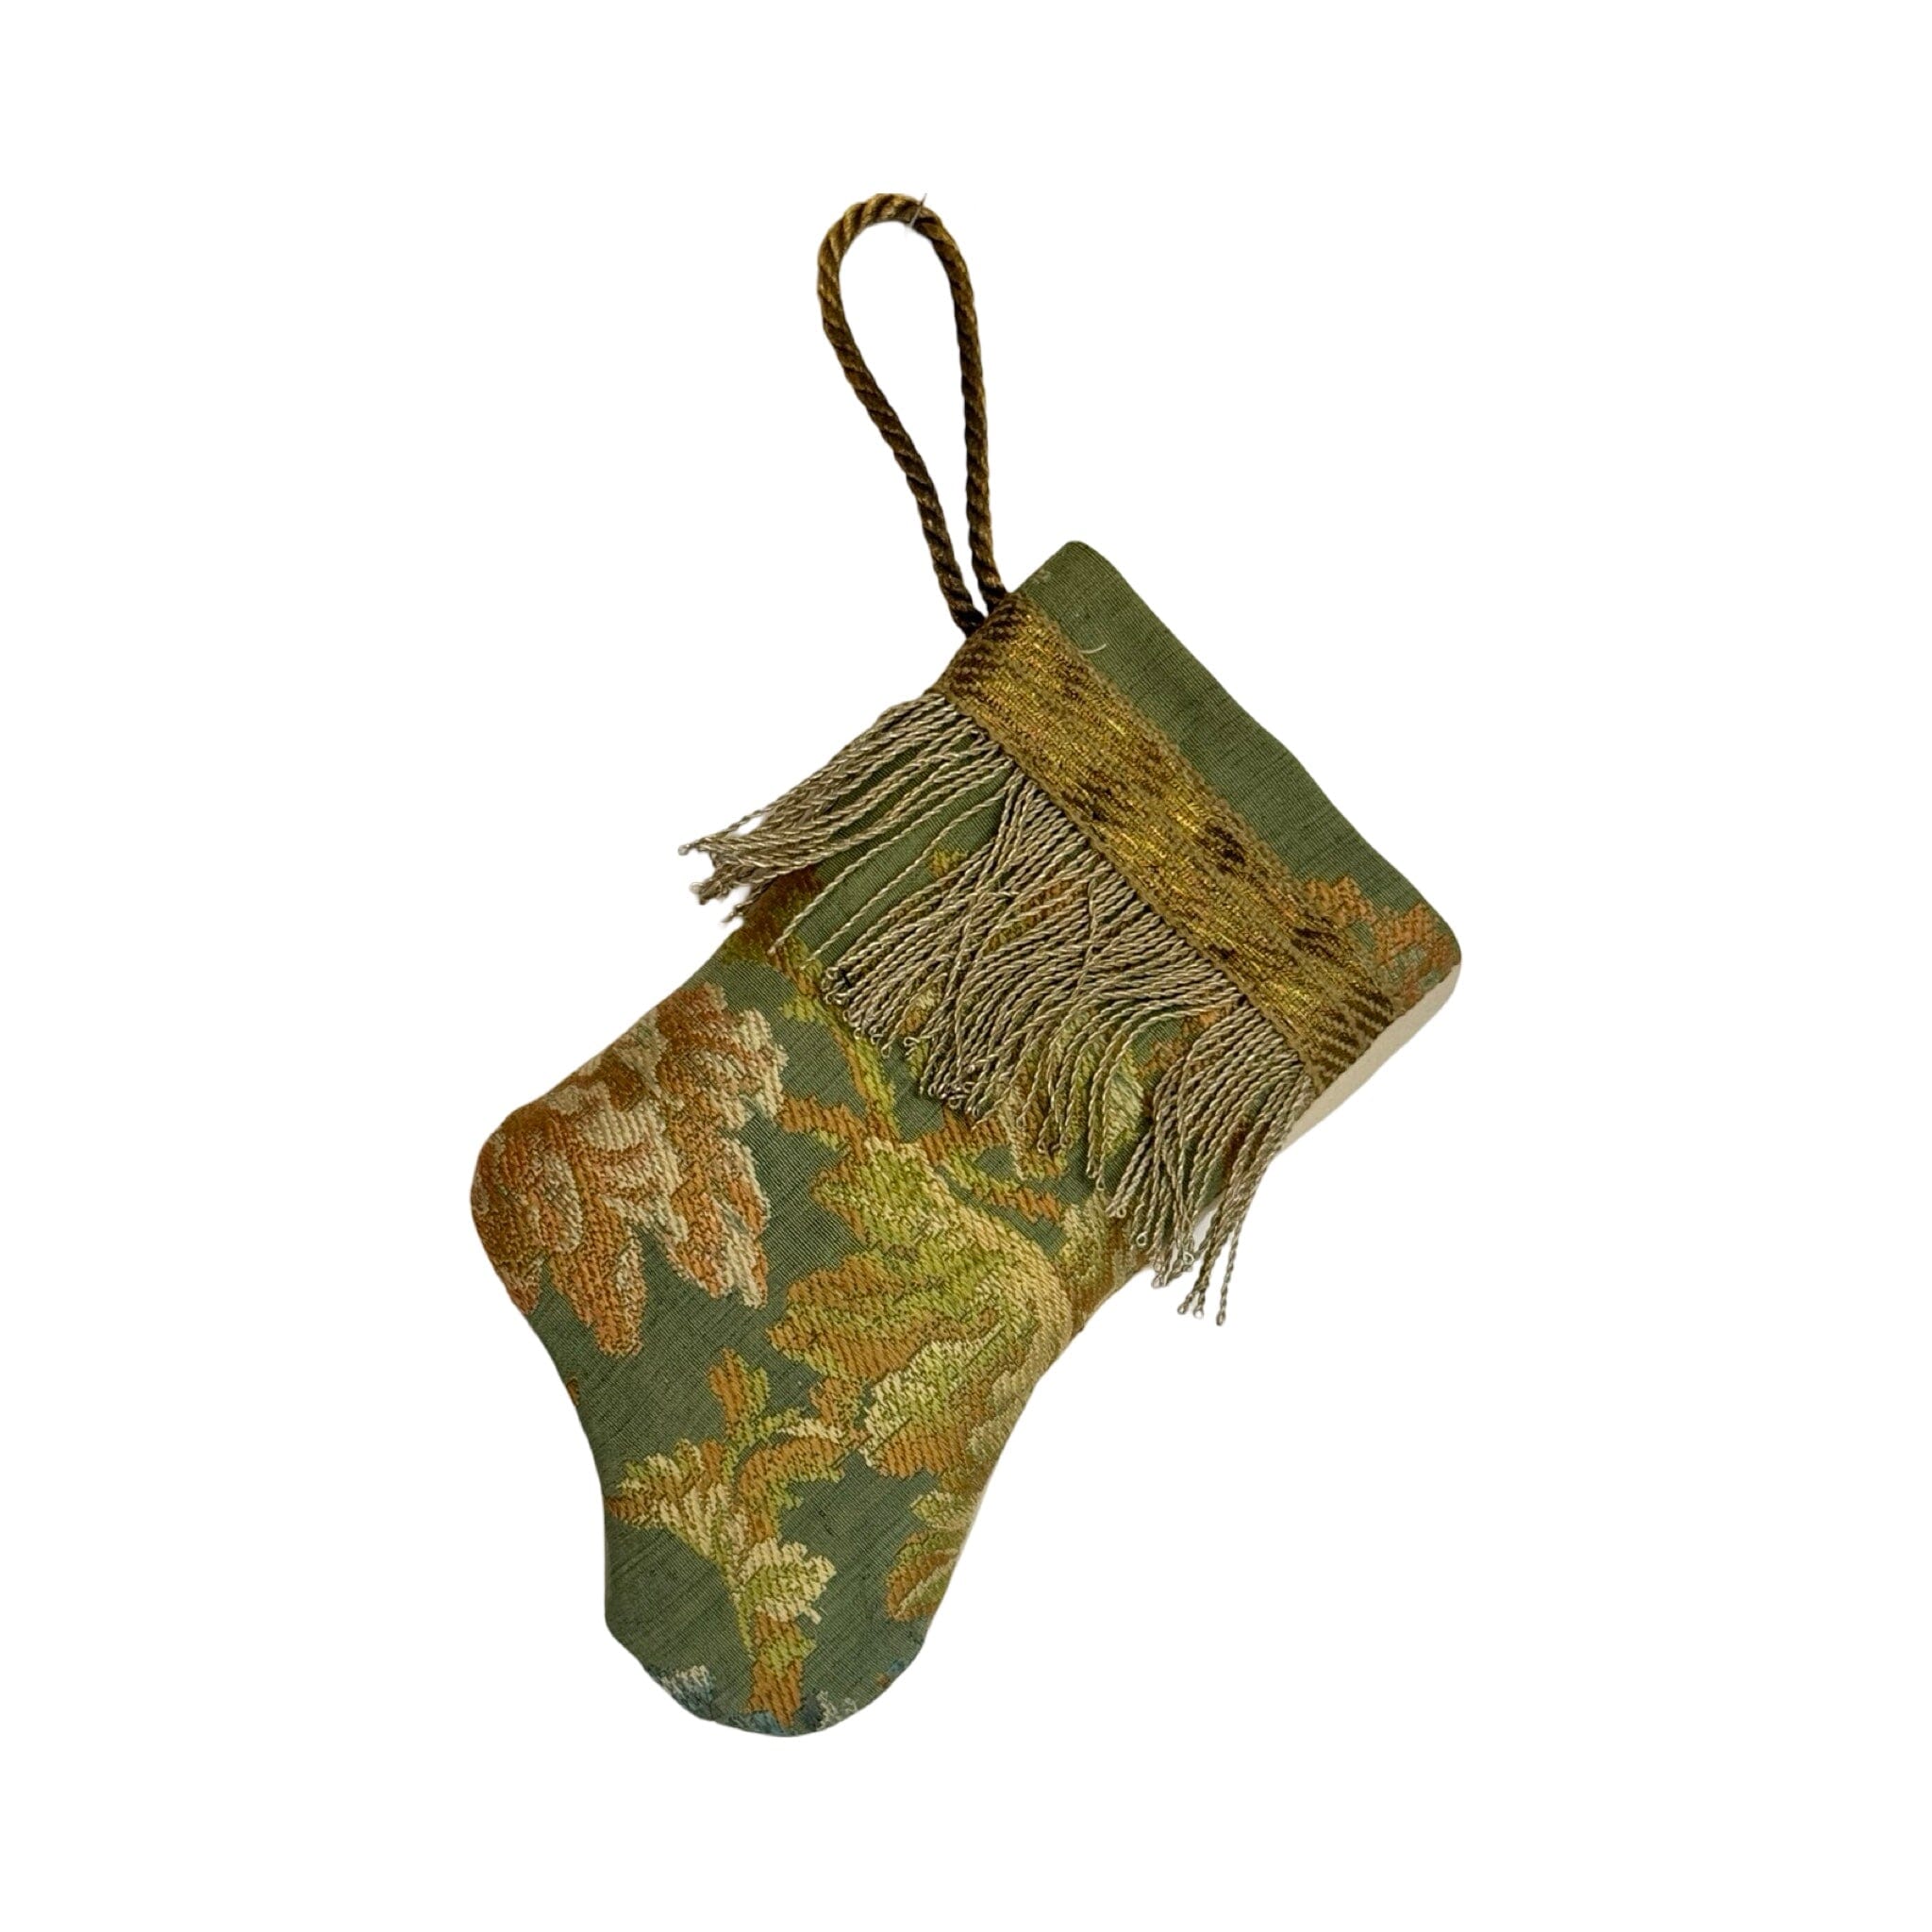 Handmade Mini Stocking Made From Vintage Fabric and Trims- Green Floral Ornament B. Viz Design I 